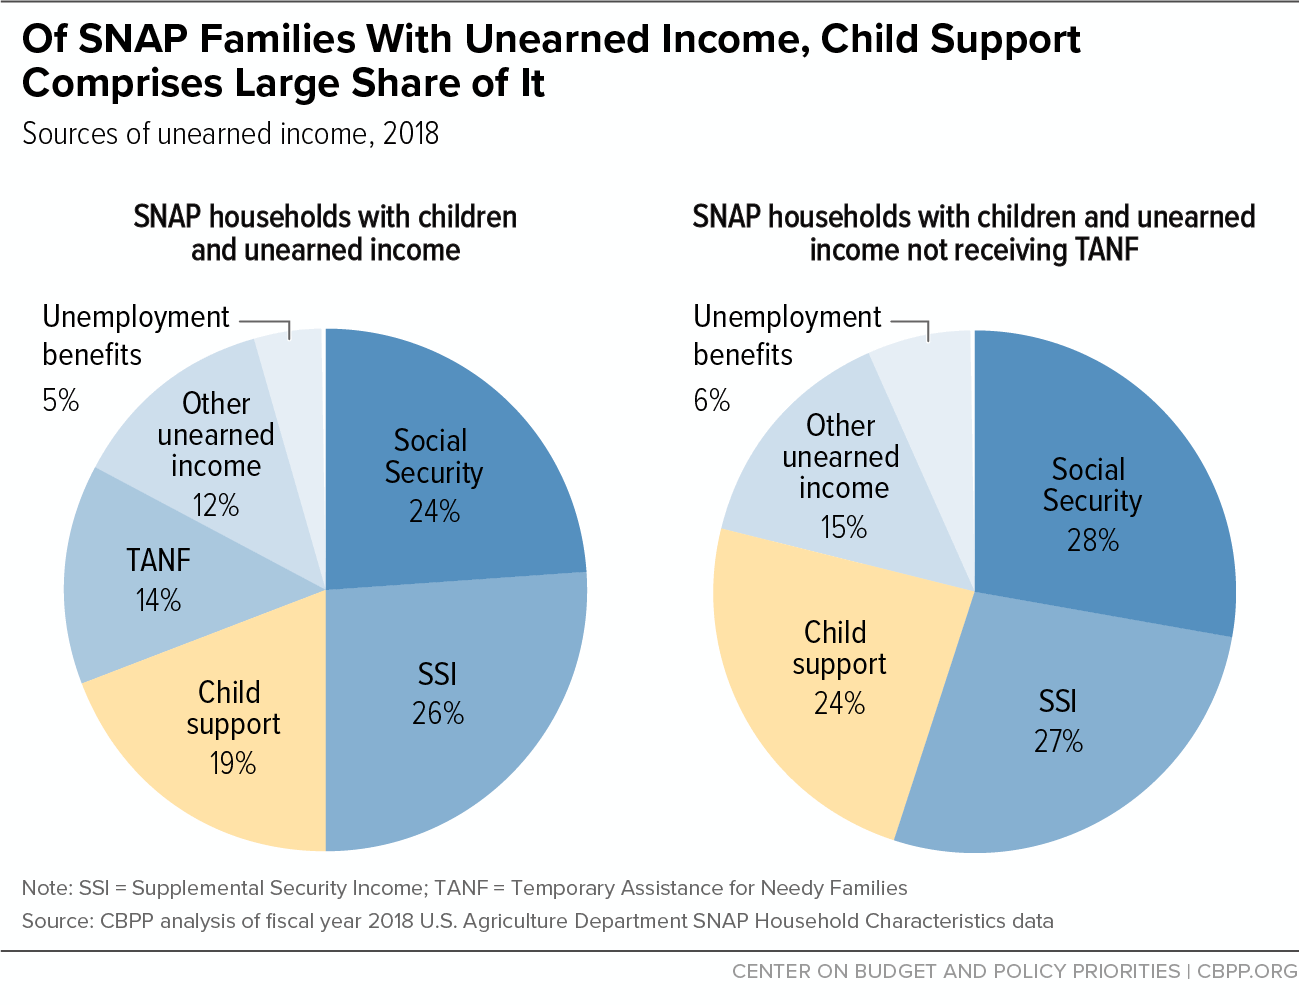 Of SNAP Families With Unearned Income, Child Support Comprises Large Share of It